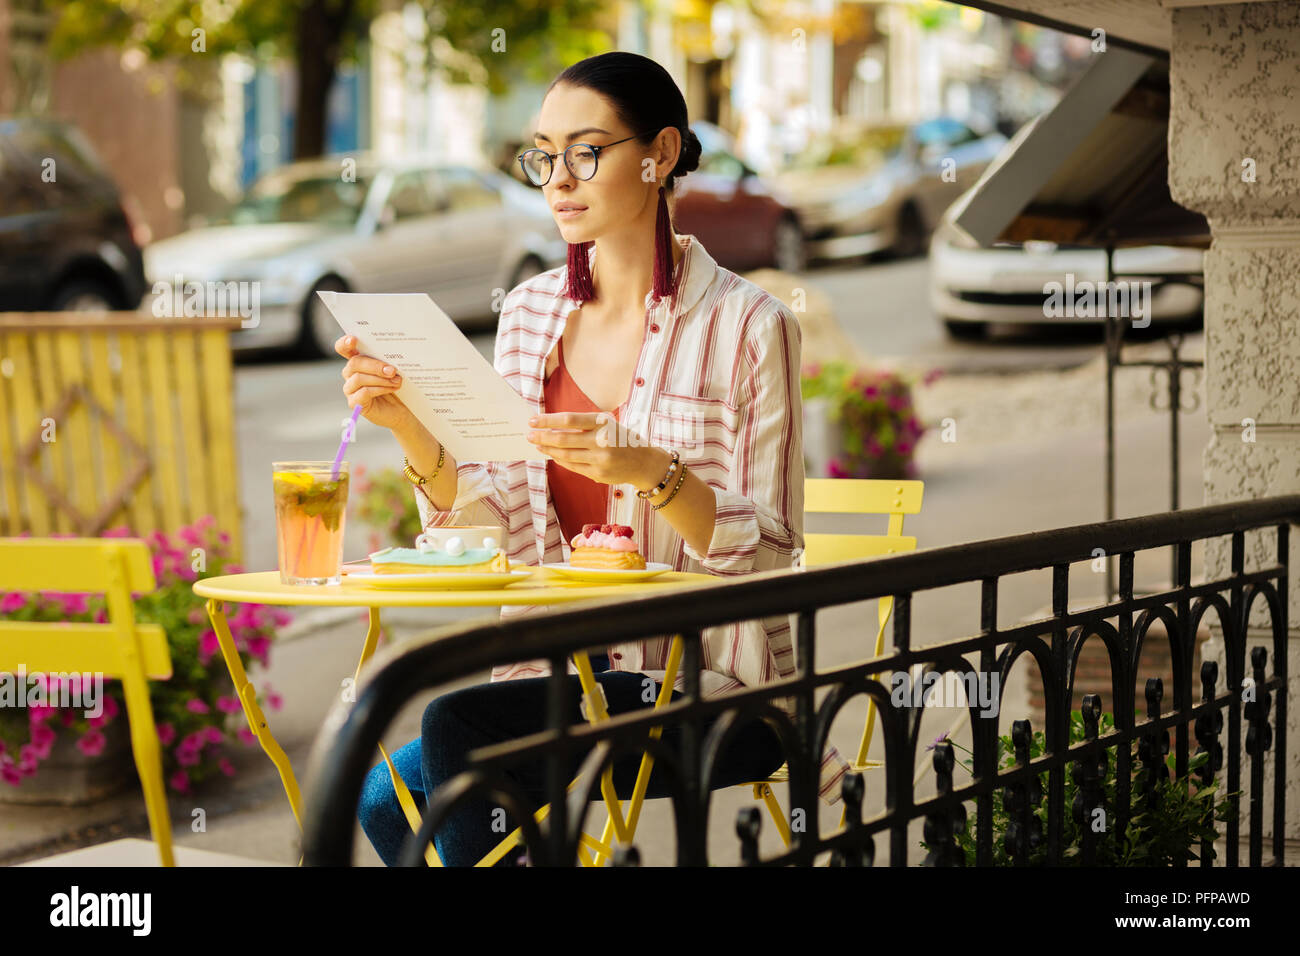 Young woman in a cafe reading a menu before eating dessert Stock Photo